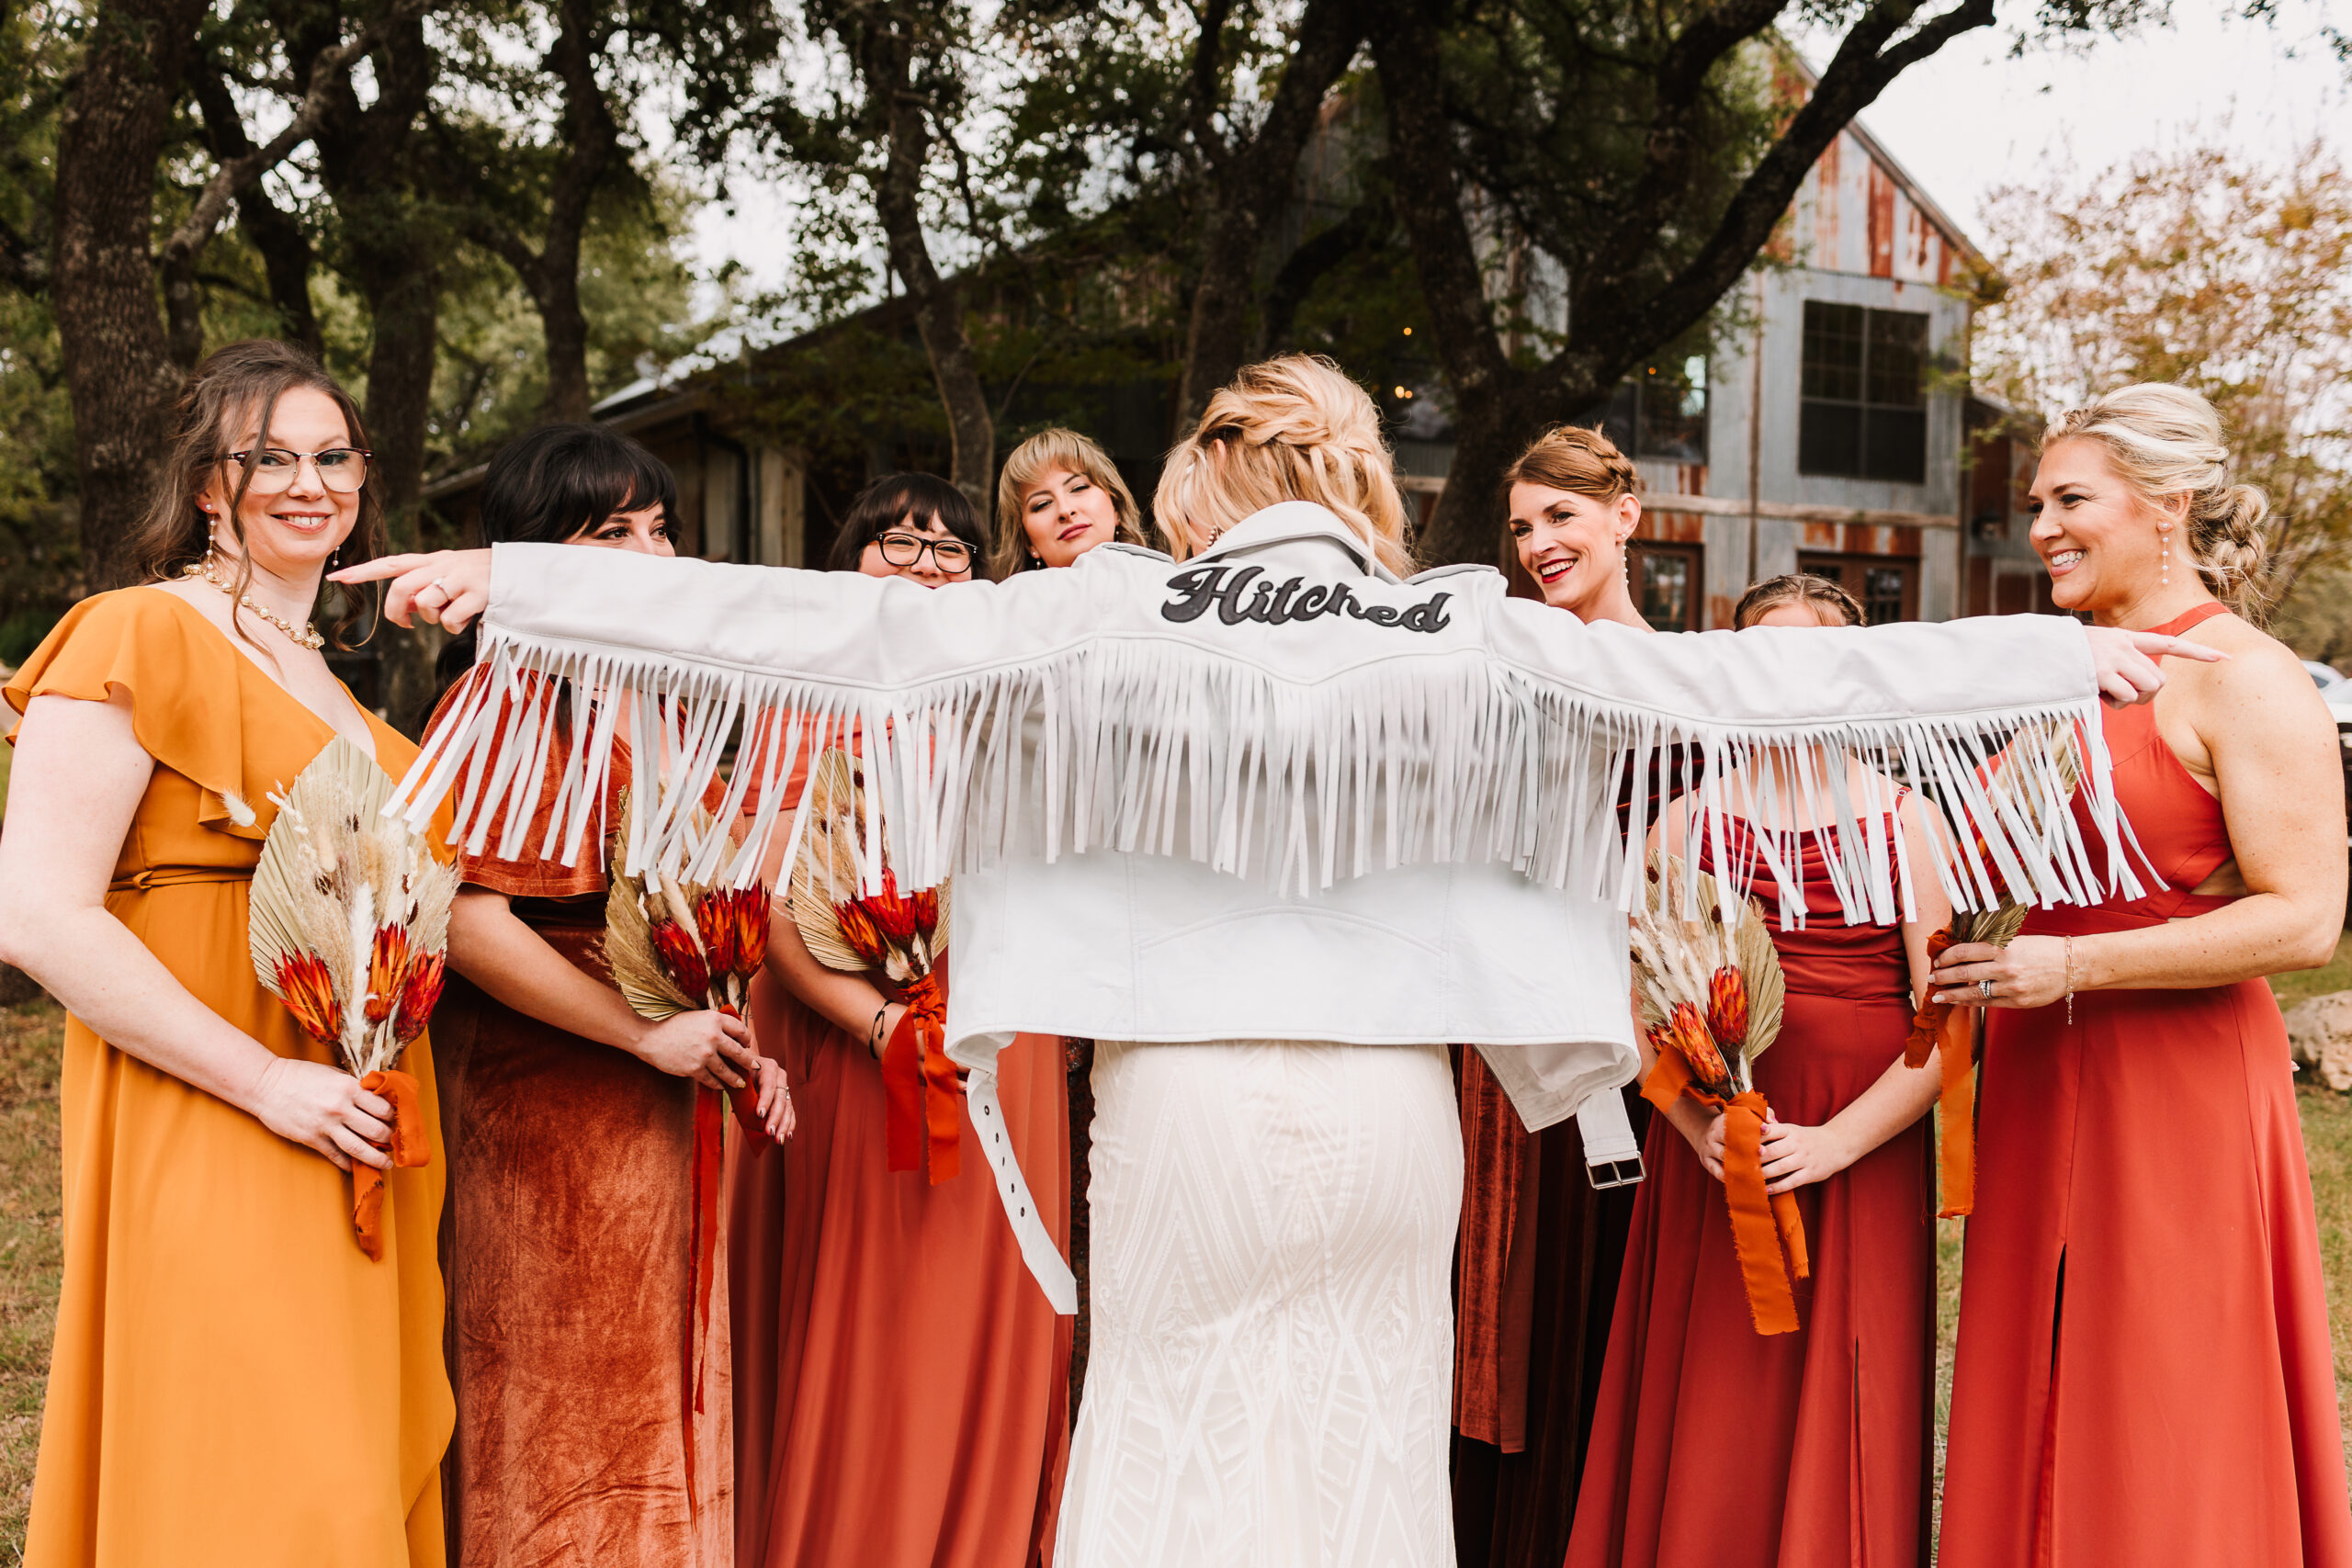 boho wedding chic on full display at vista west ranch in dripping springs, texas